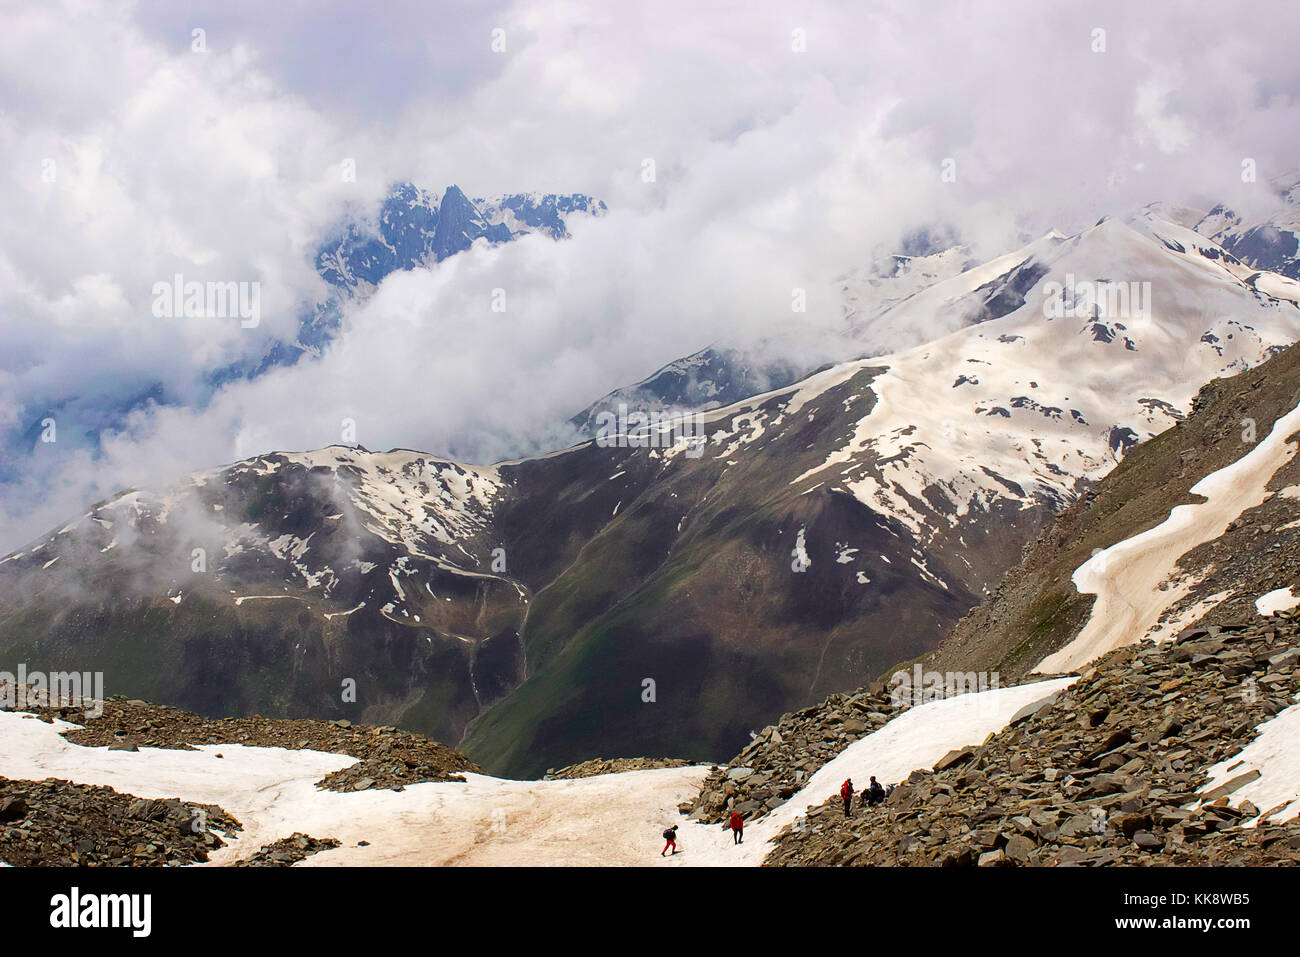 Clouds and snow clad mountains becoming one and trekkers at the base. Himachal Pradesh, Northern India Stock Photo